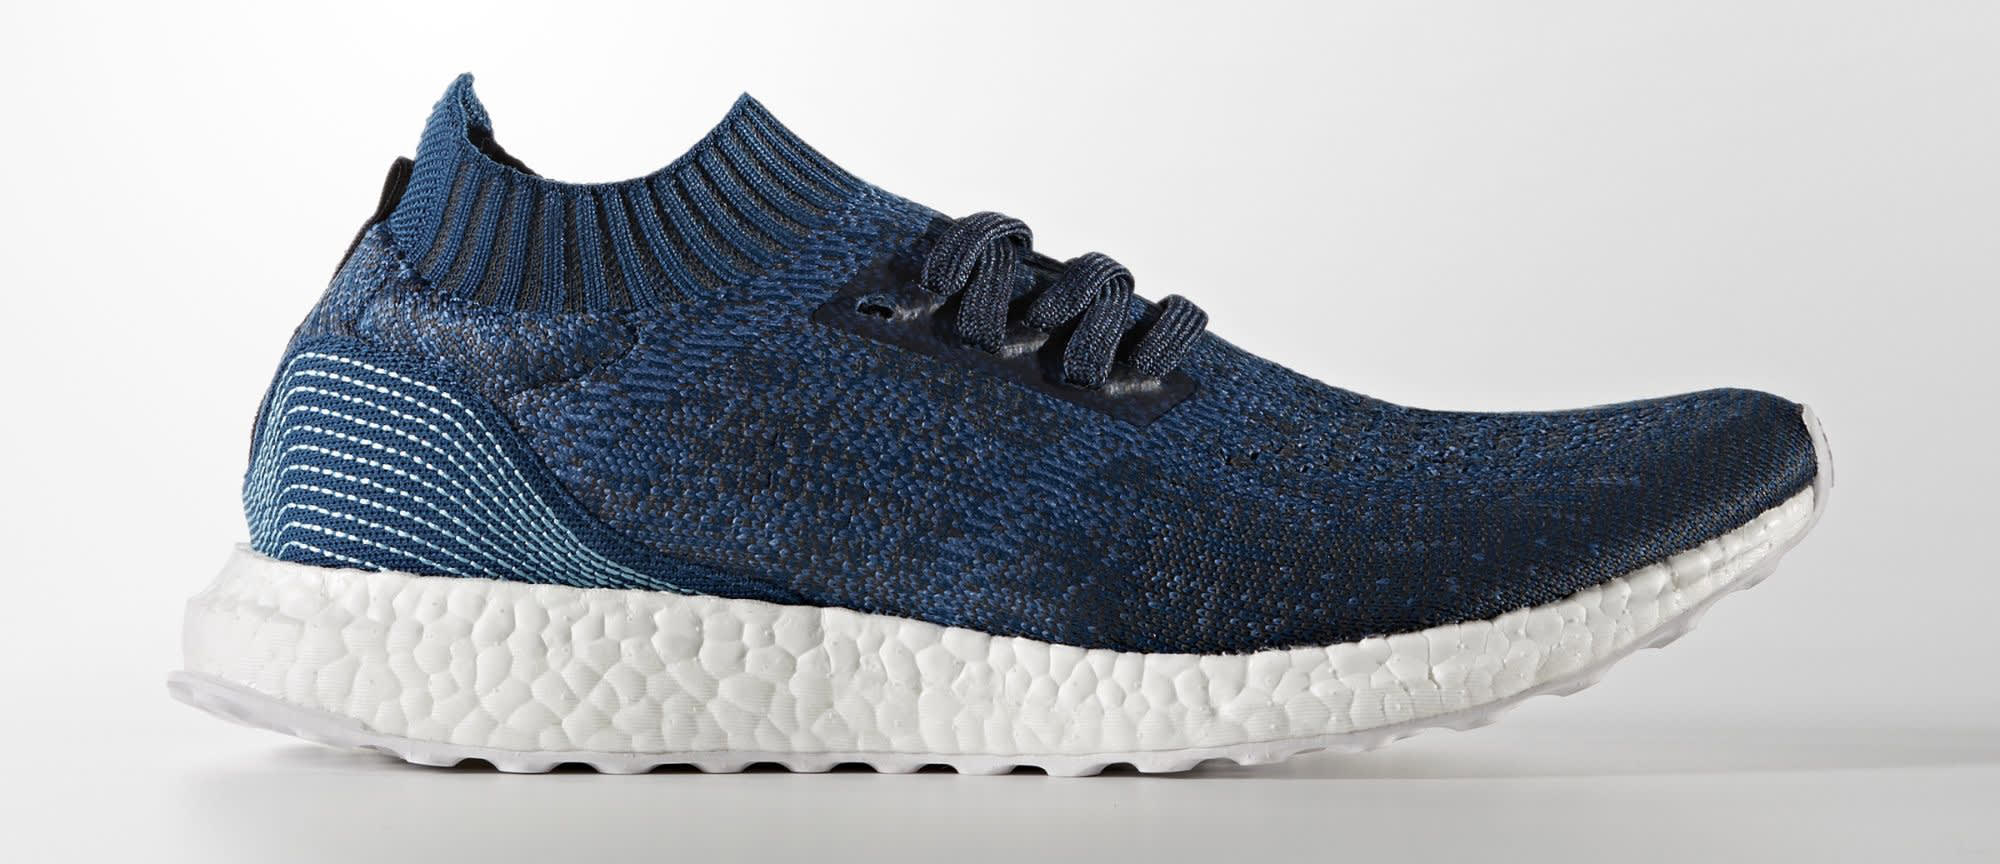 Parley Adidas Ultra Boost Uncaged